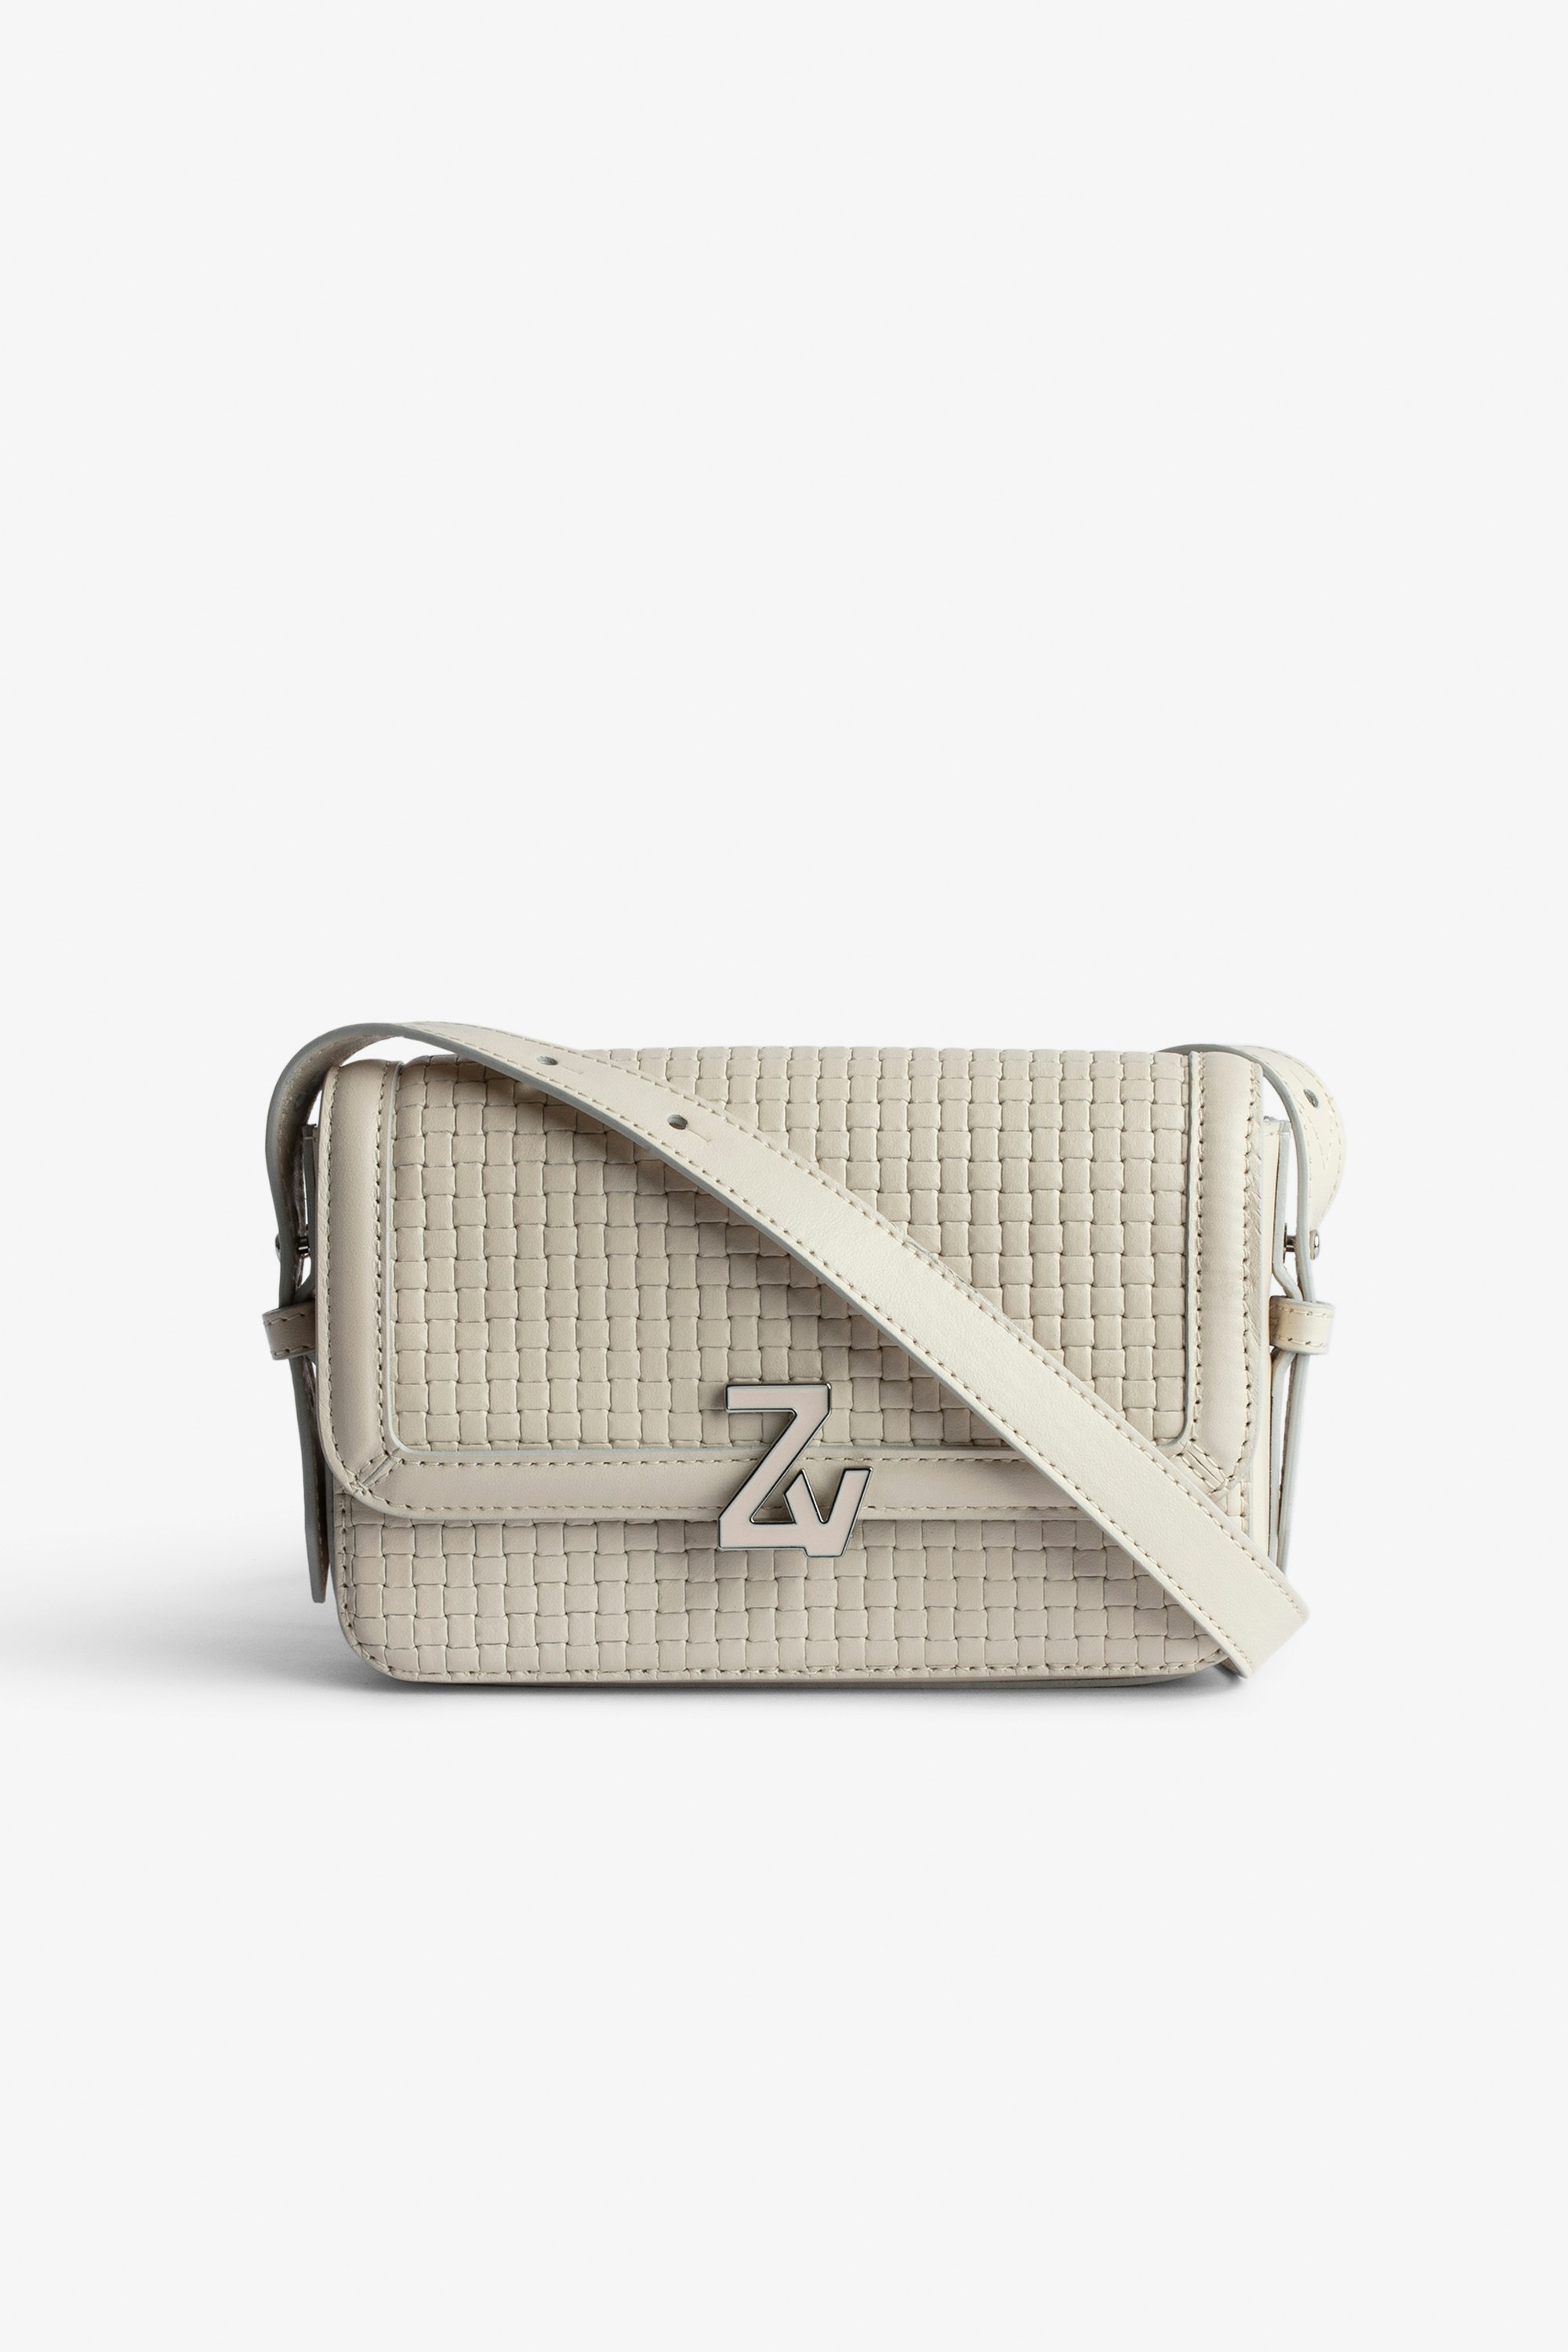 Le Mini ZV Initiale Bag  undefined